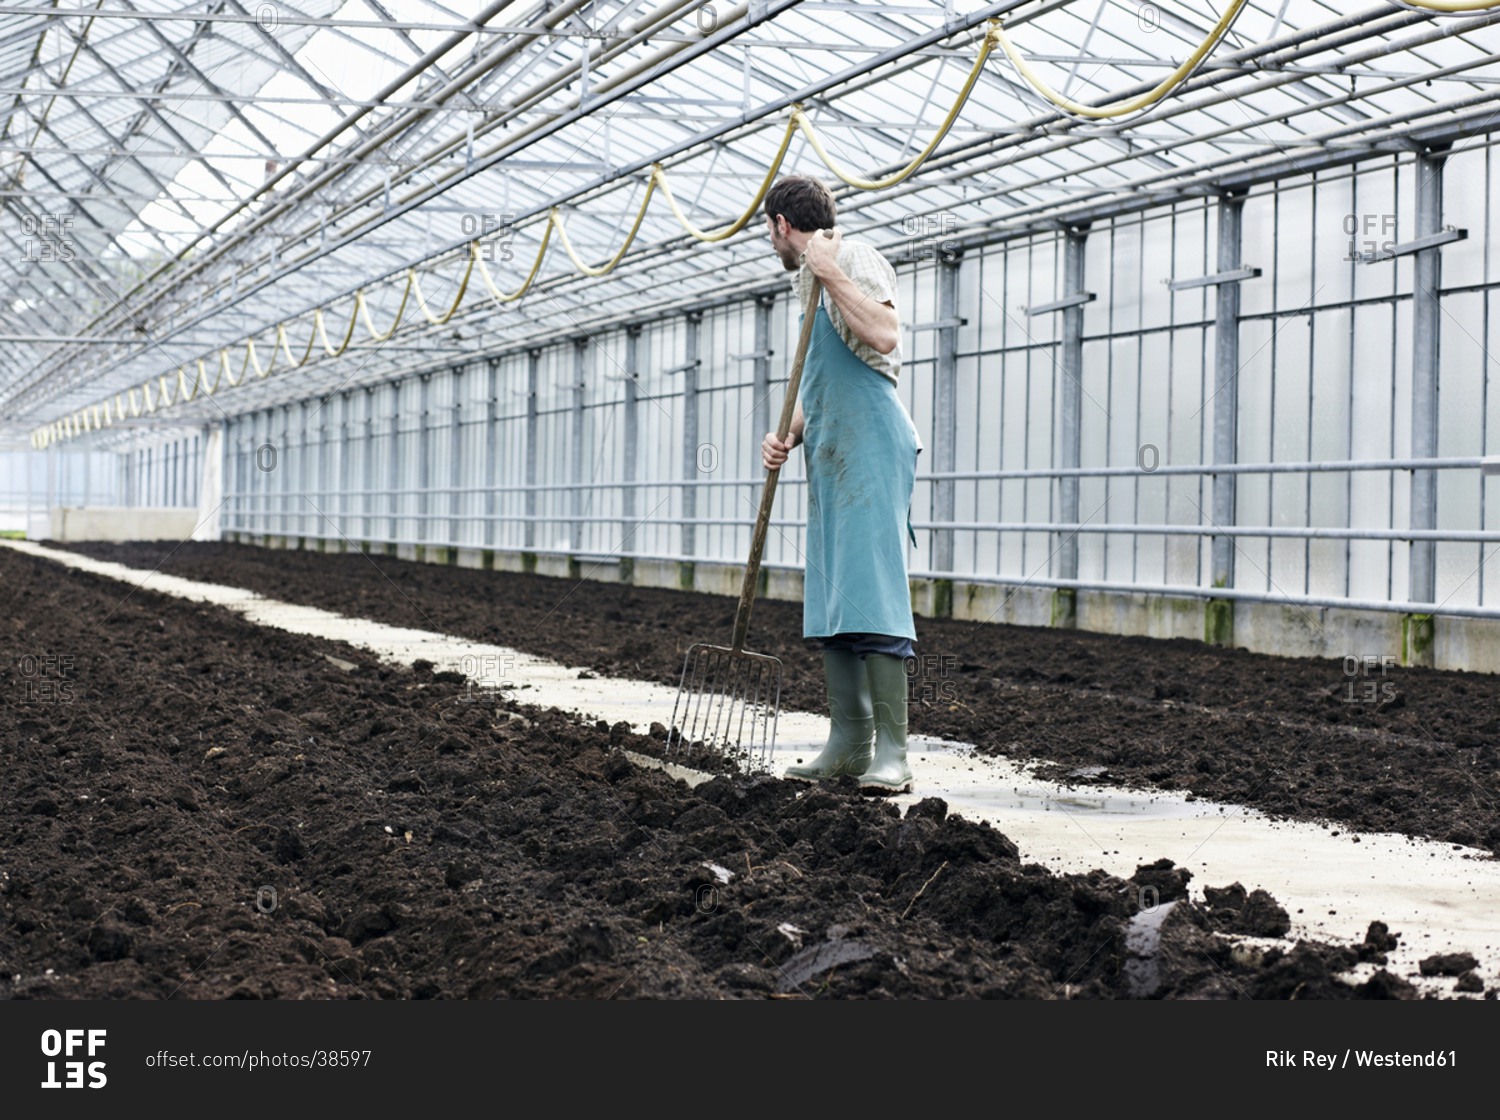 Germany, Bavaria, Munich, Mature man digging soil with garden fork in greenhouse